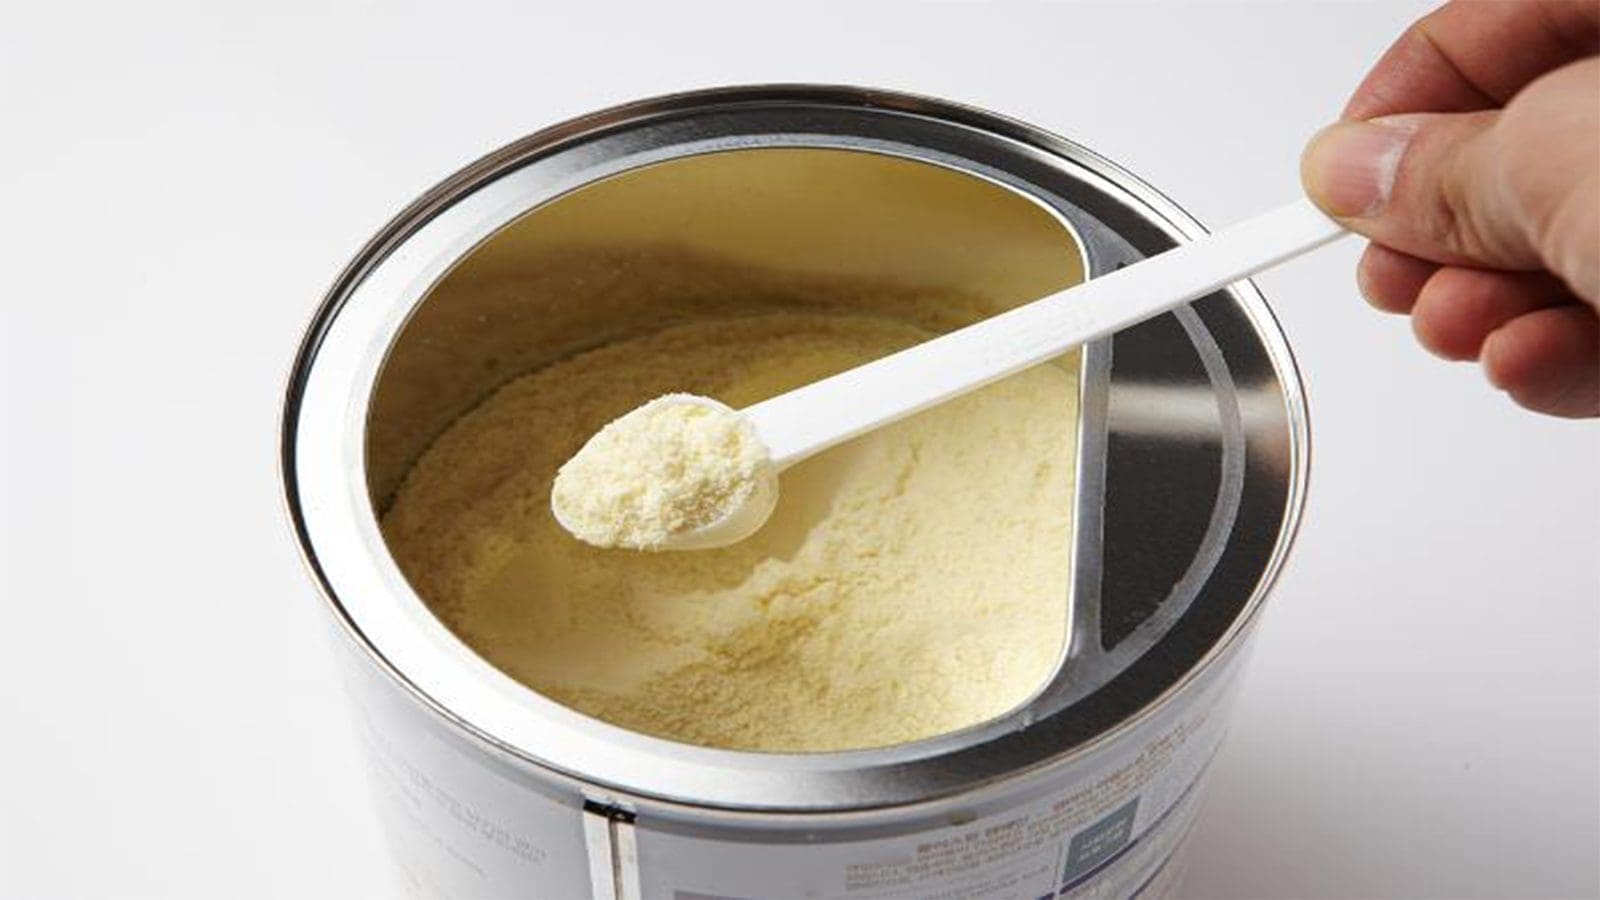 Regulatory response seeks to fortify infant formula safety following 2022 crisis